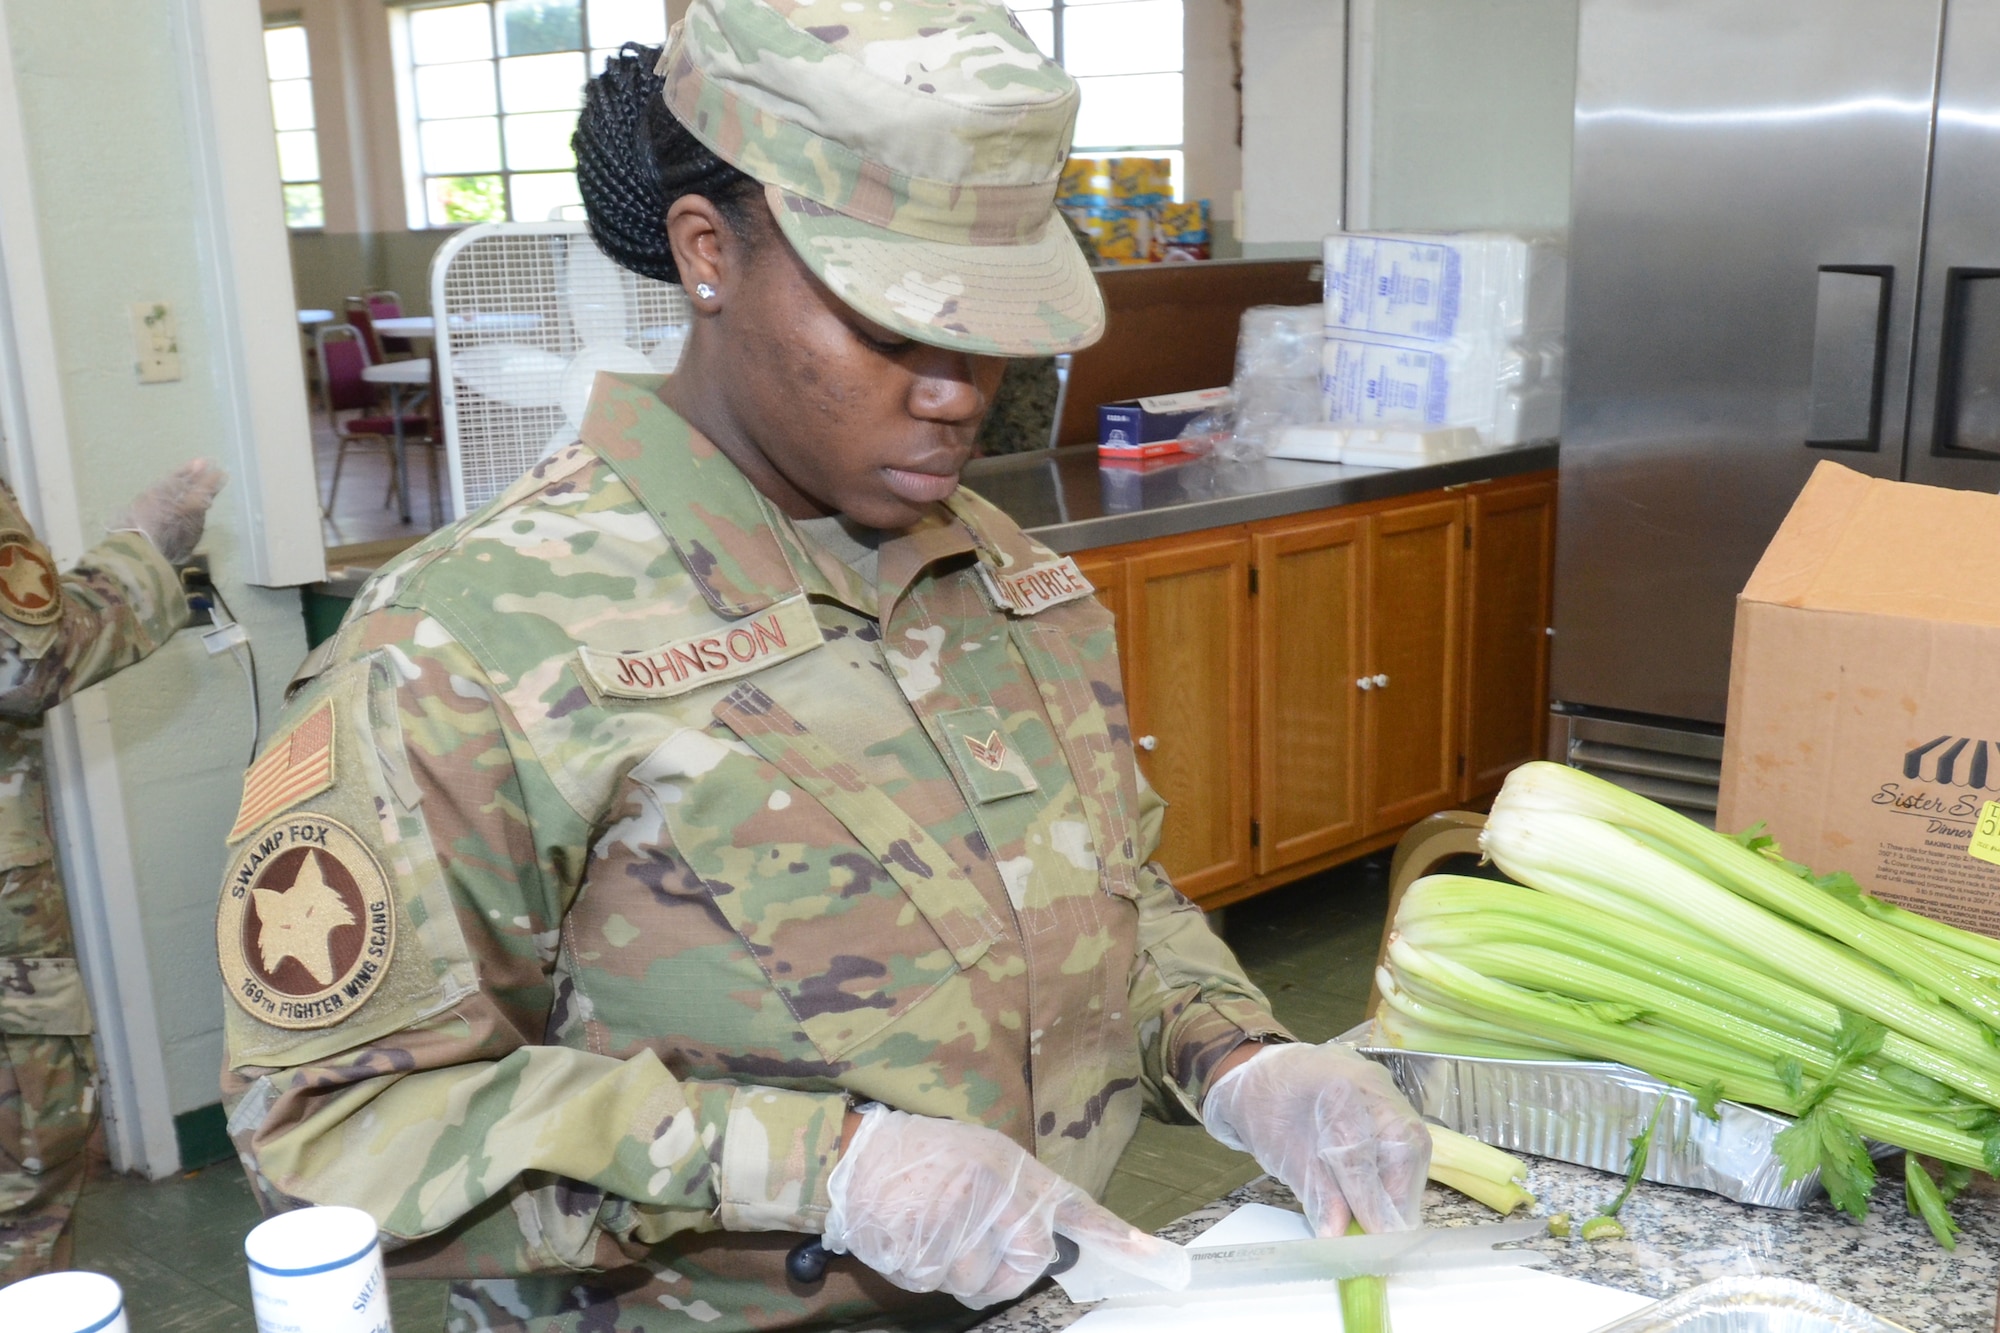 .S. Air Force Senior Airman Lakendra Johnson, food services specialist assigned to the 169th Fighter Wing, McEntire Joint National Guard Base, South Carolina, supports Operation Healthy Delta, a Department of Defense sponsored Innovative Readiness Training program designed to provide military training opportunities by providing key services to local citizens. Johnson is preparing food for the military personnel working at Caruthersville, Missouri June 15, 2021. (U.S. Air National Guard photo by Lt. Col. Jim St.Clair, 169th Fighter Wing Public Affairs)